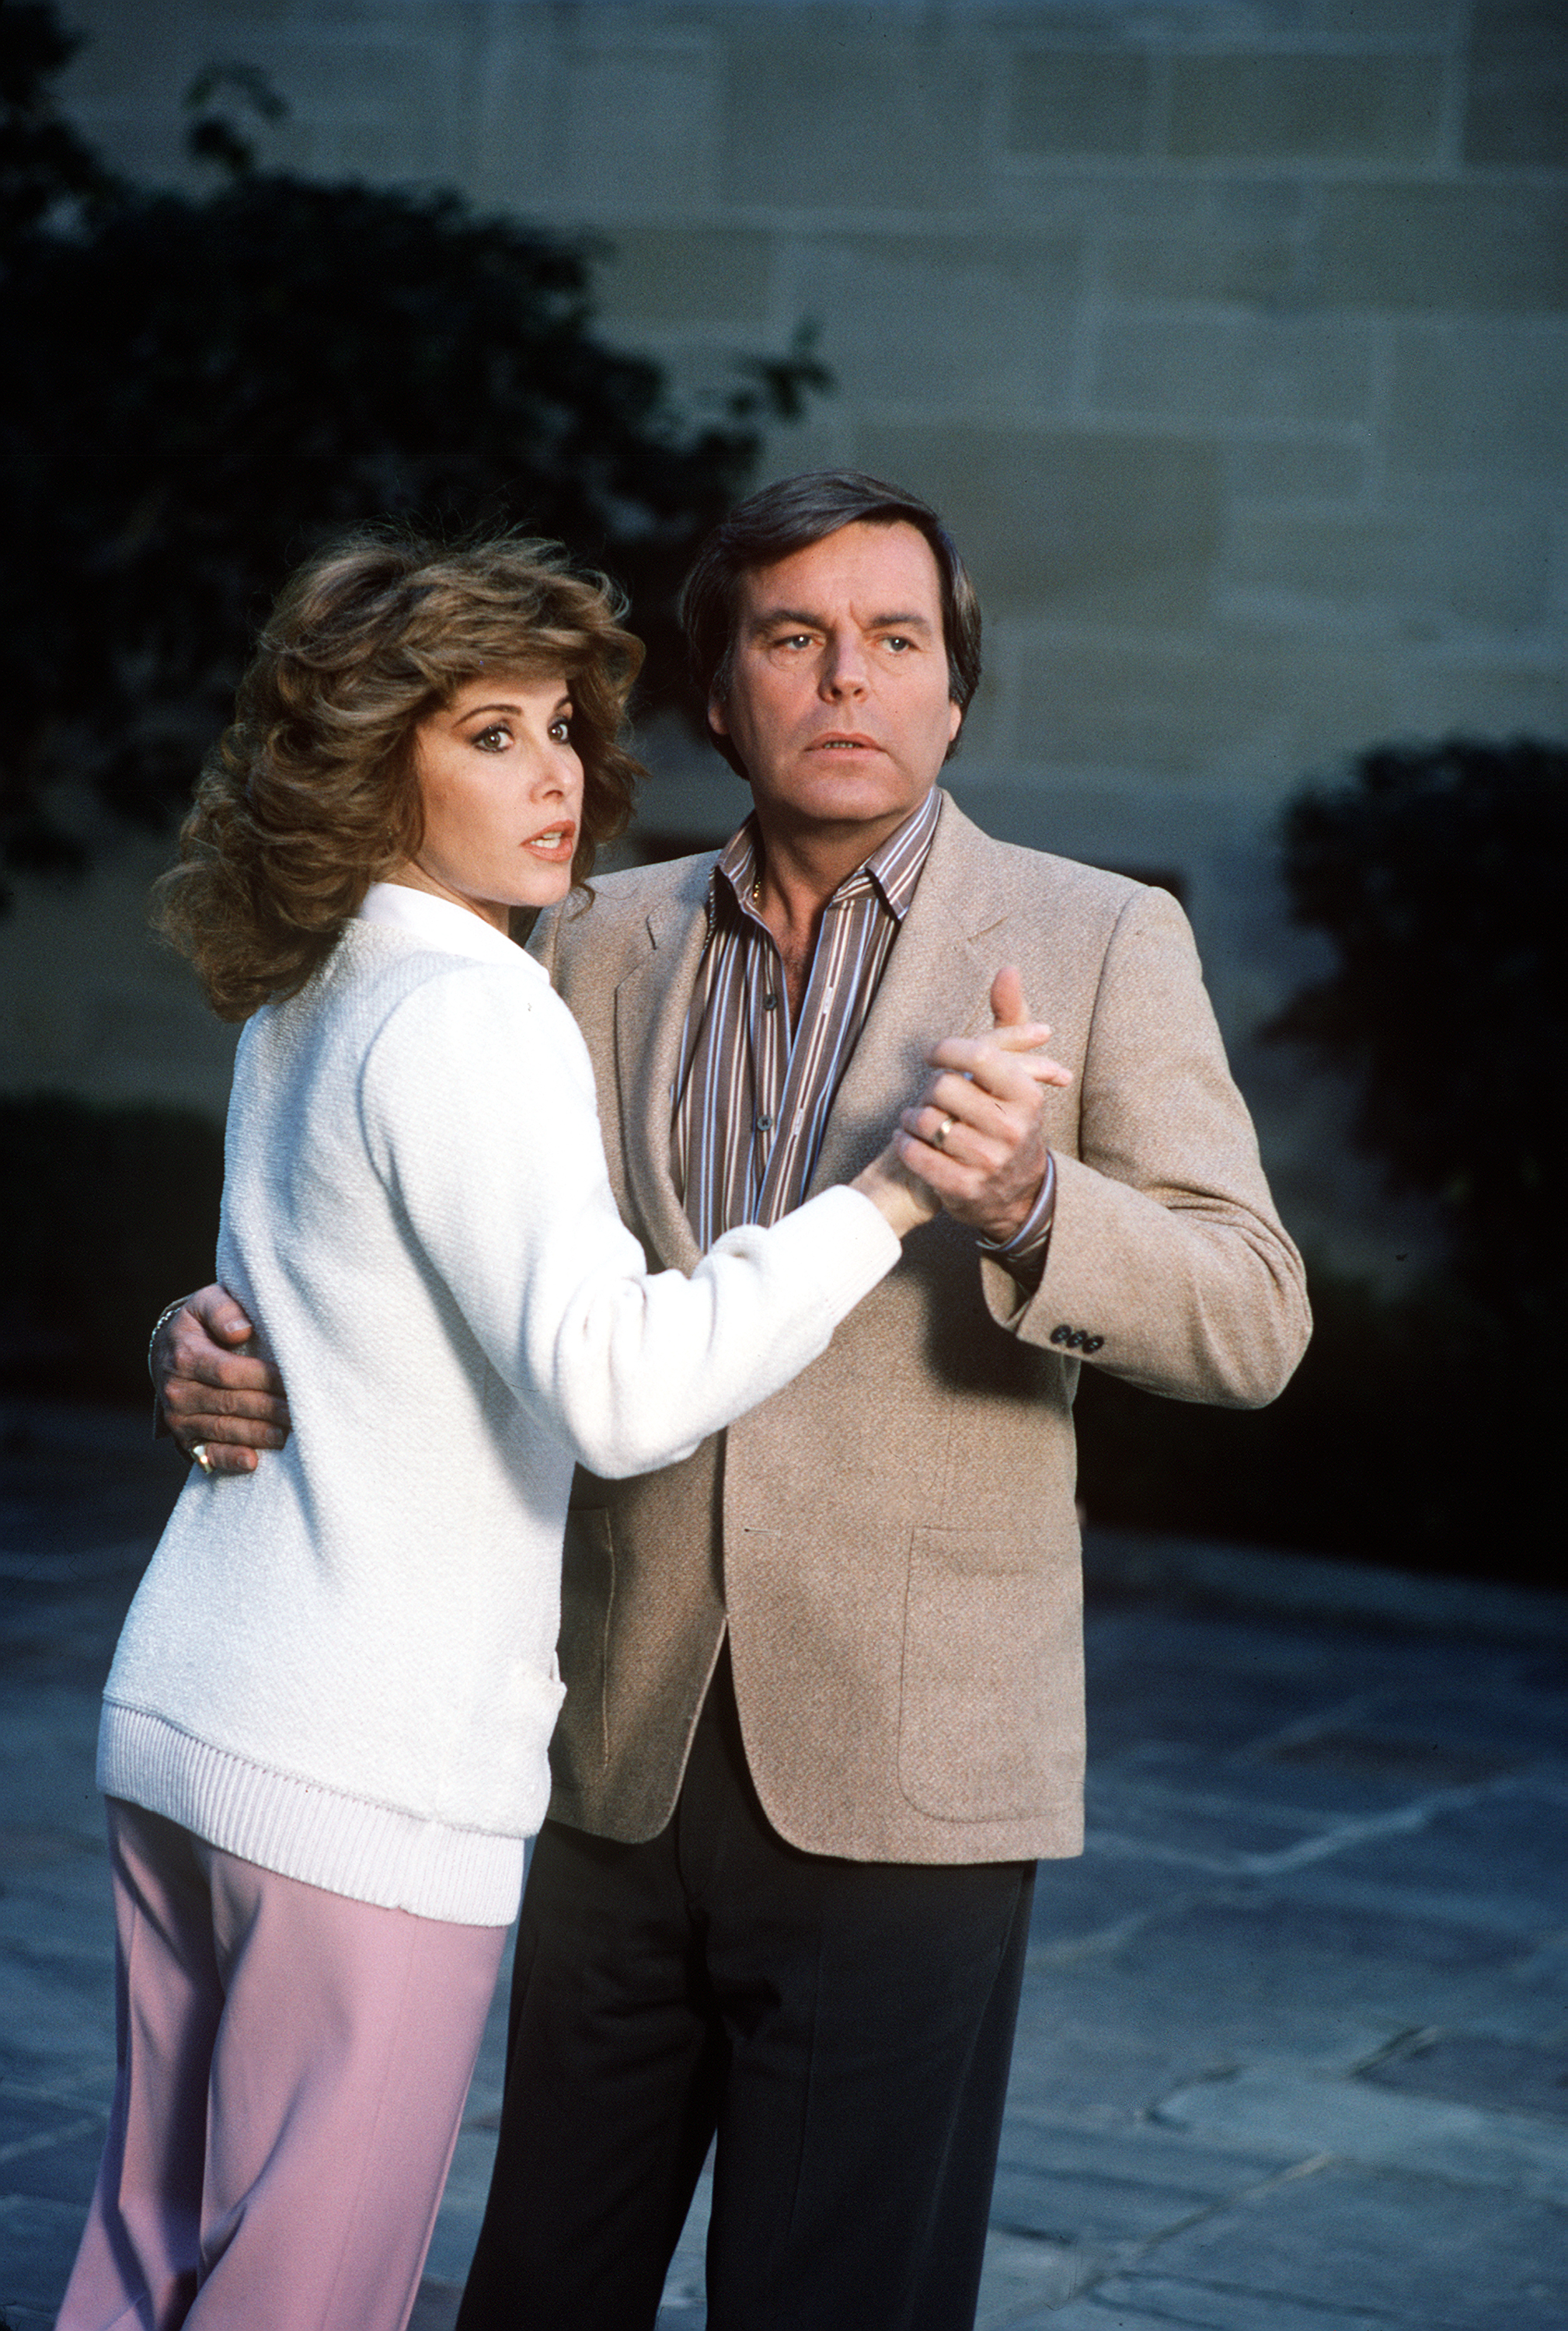 Robert Wagner and Stefanie Powers in "Hart to Hart" on February 16, 1982 | Source: Getty Images